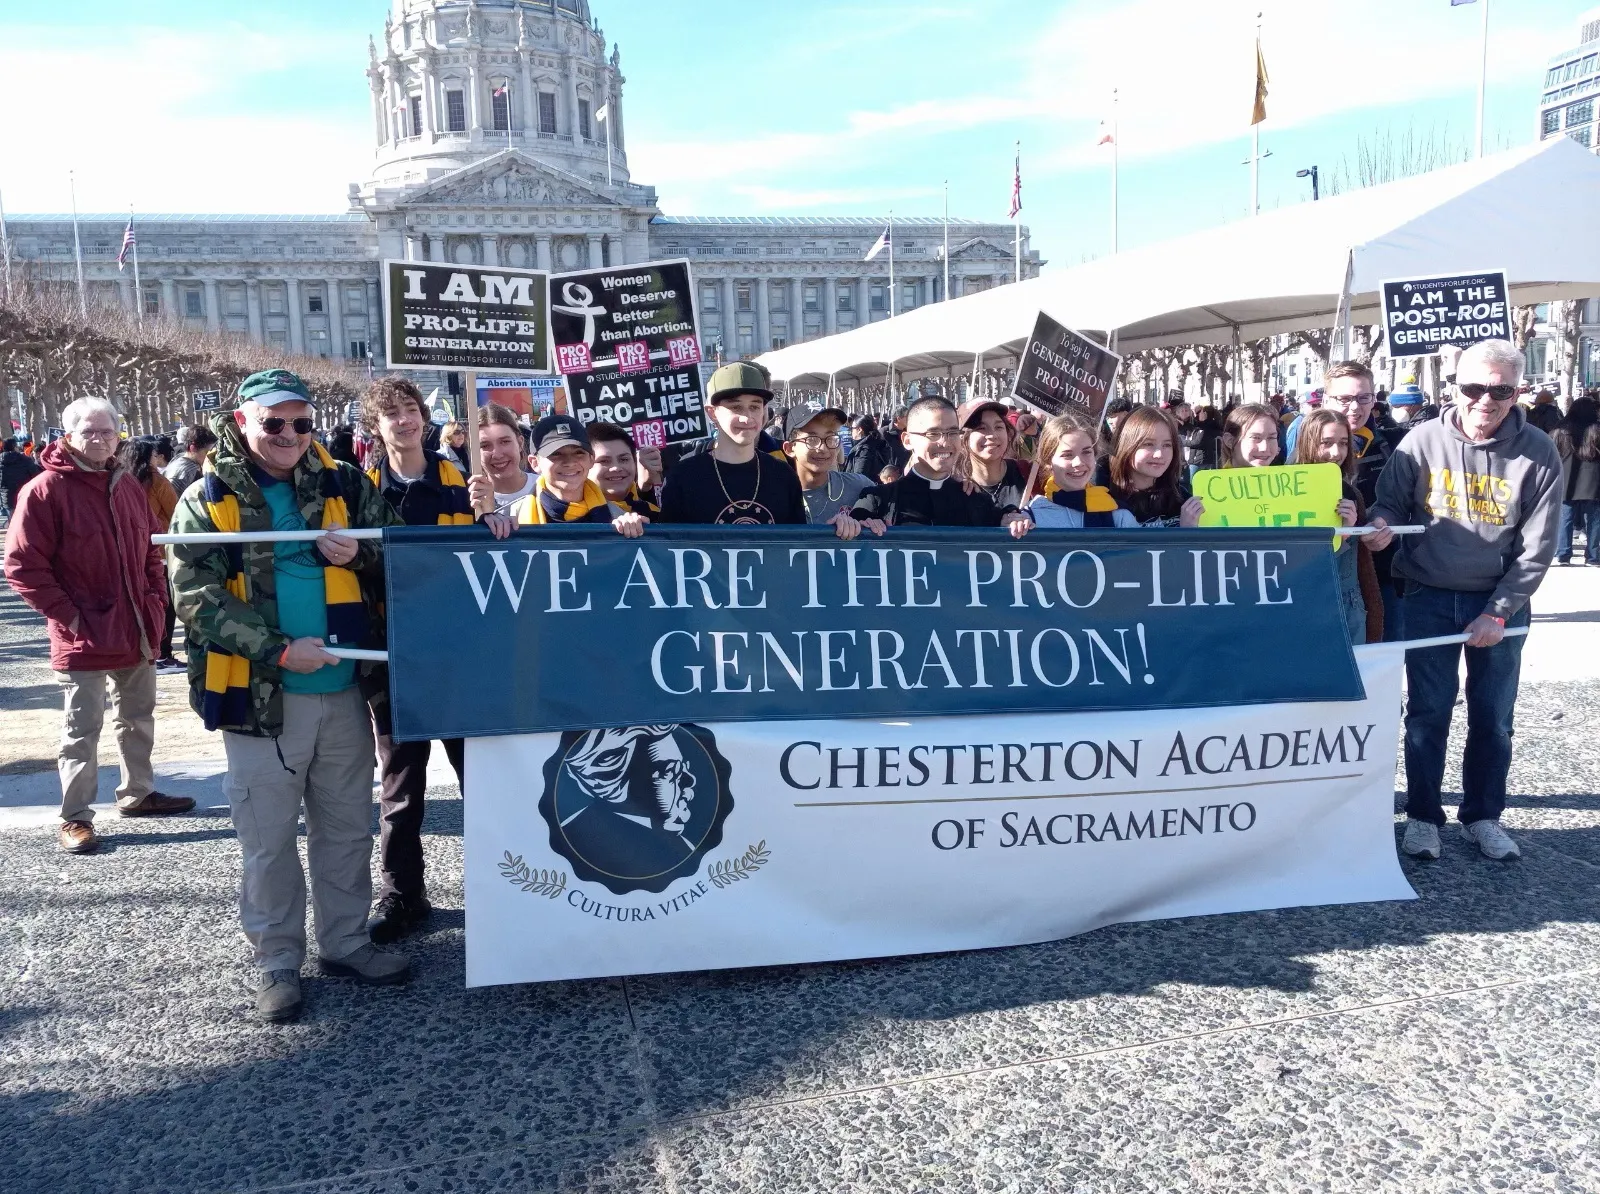 A group from Chesterton Academy of Sacramento participates in the West Coast Walk for Life on Jan. 21, 2023, in San Francisco. Credit: Joseph Moore/Chesterton Academy